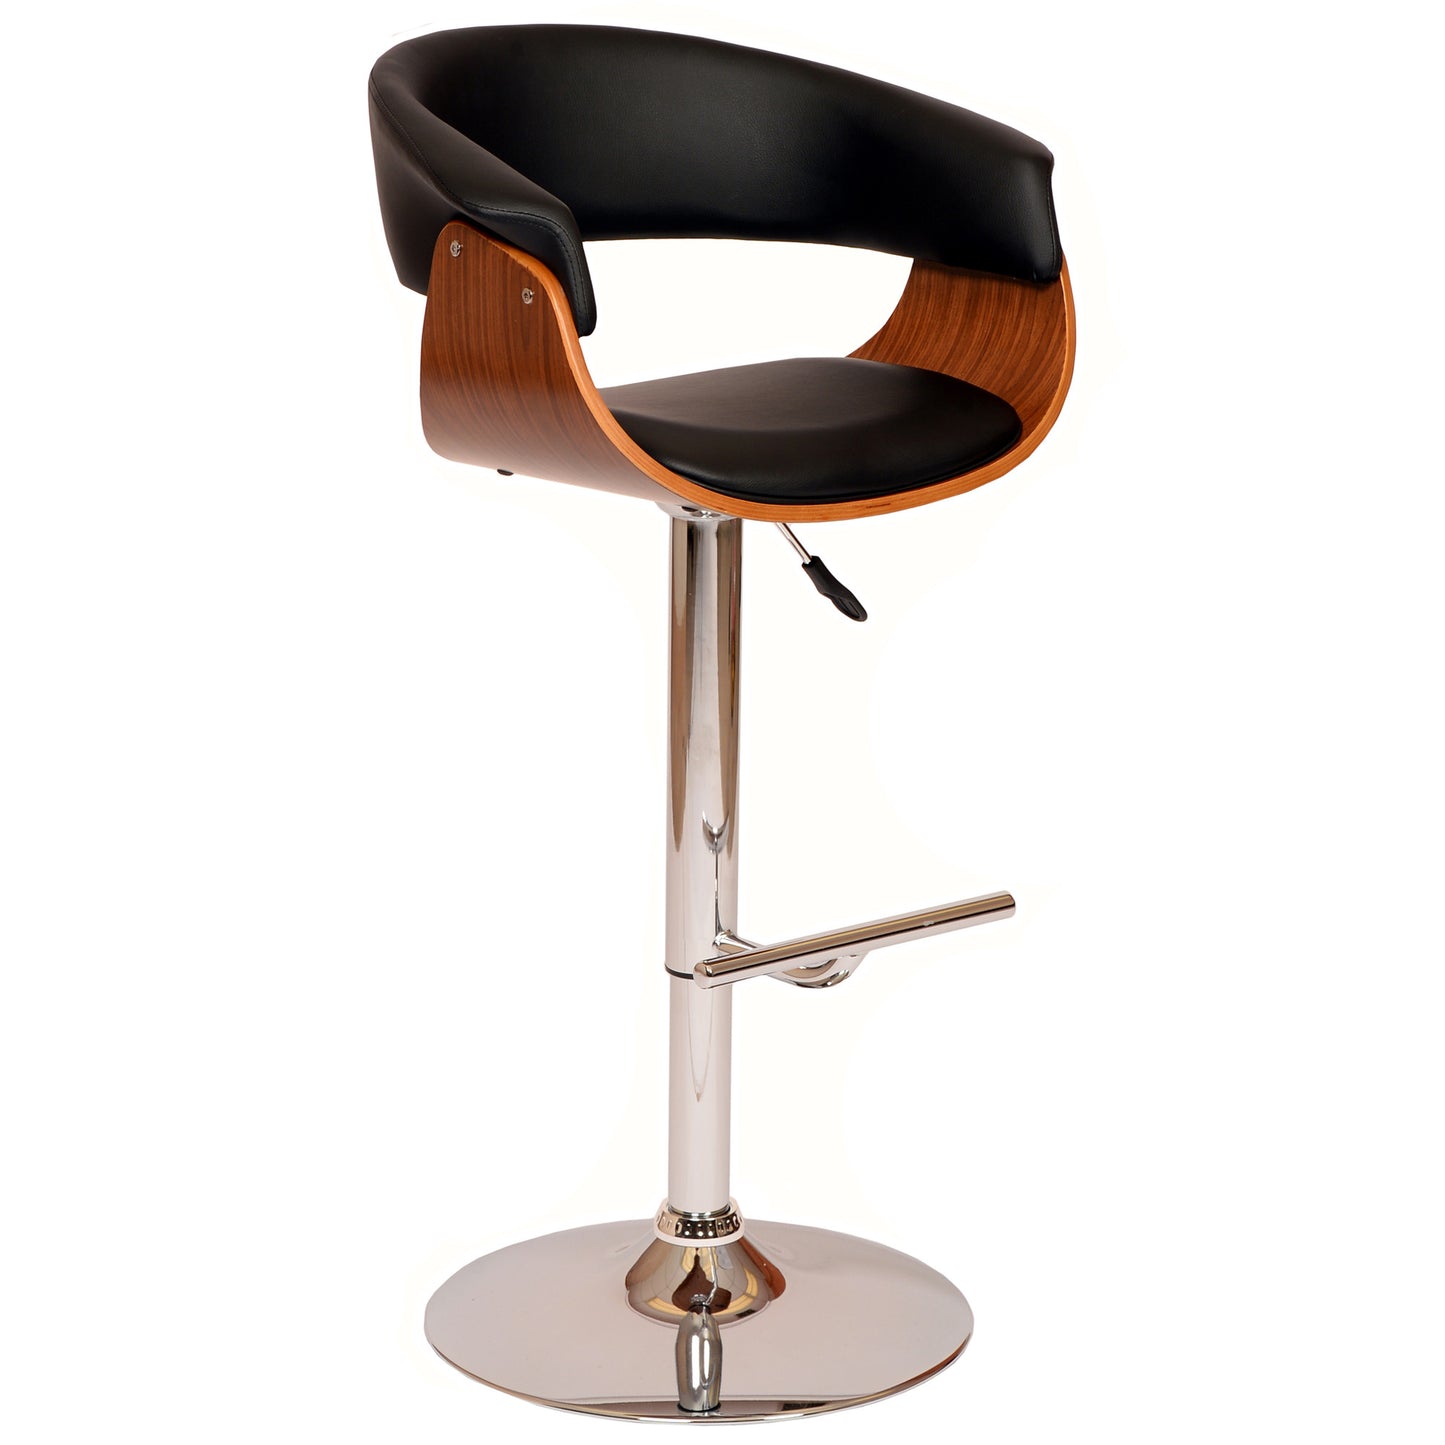 44" Black And Brown Faux Leather And Solid Wood Swivel Low Back Adjustable Height Bar Chair With Footrest